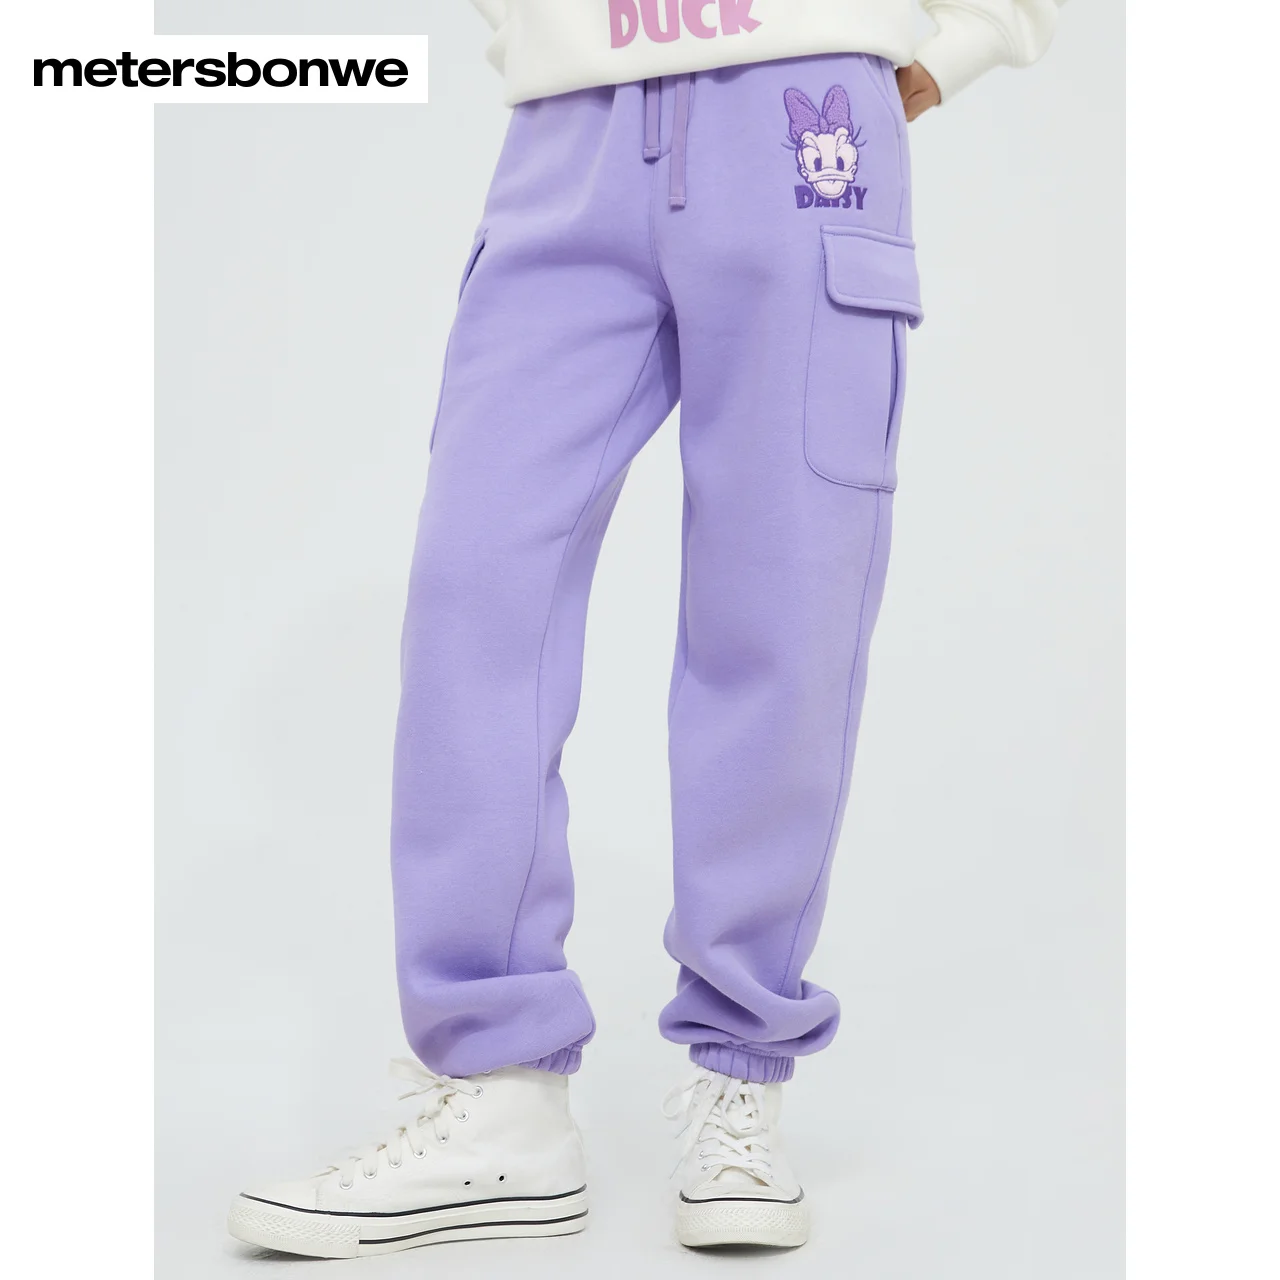 Metersbonwe Loose Thick Cuffed Pants Women New Winter Trousers Fashion Solid Color Ladies Casual Sport Pants Brand Bottoms